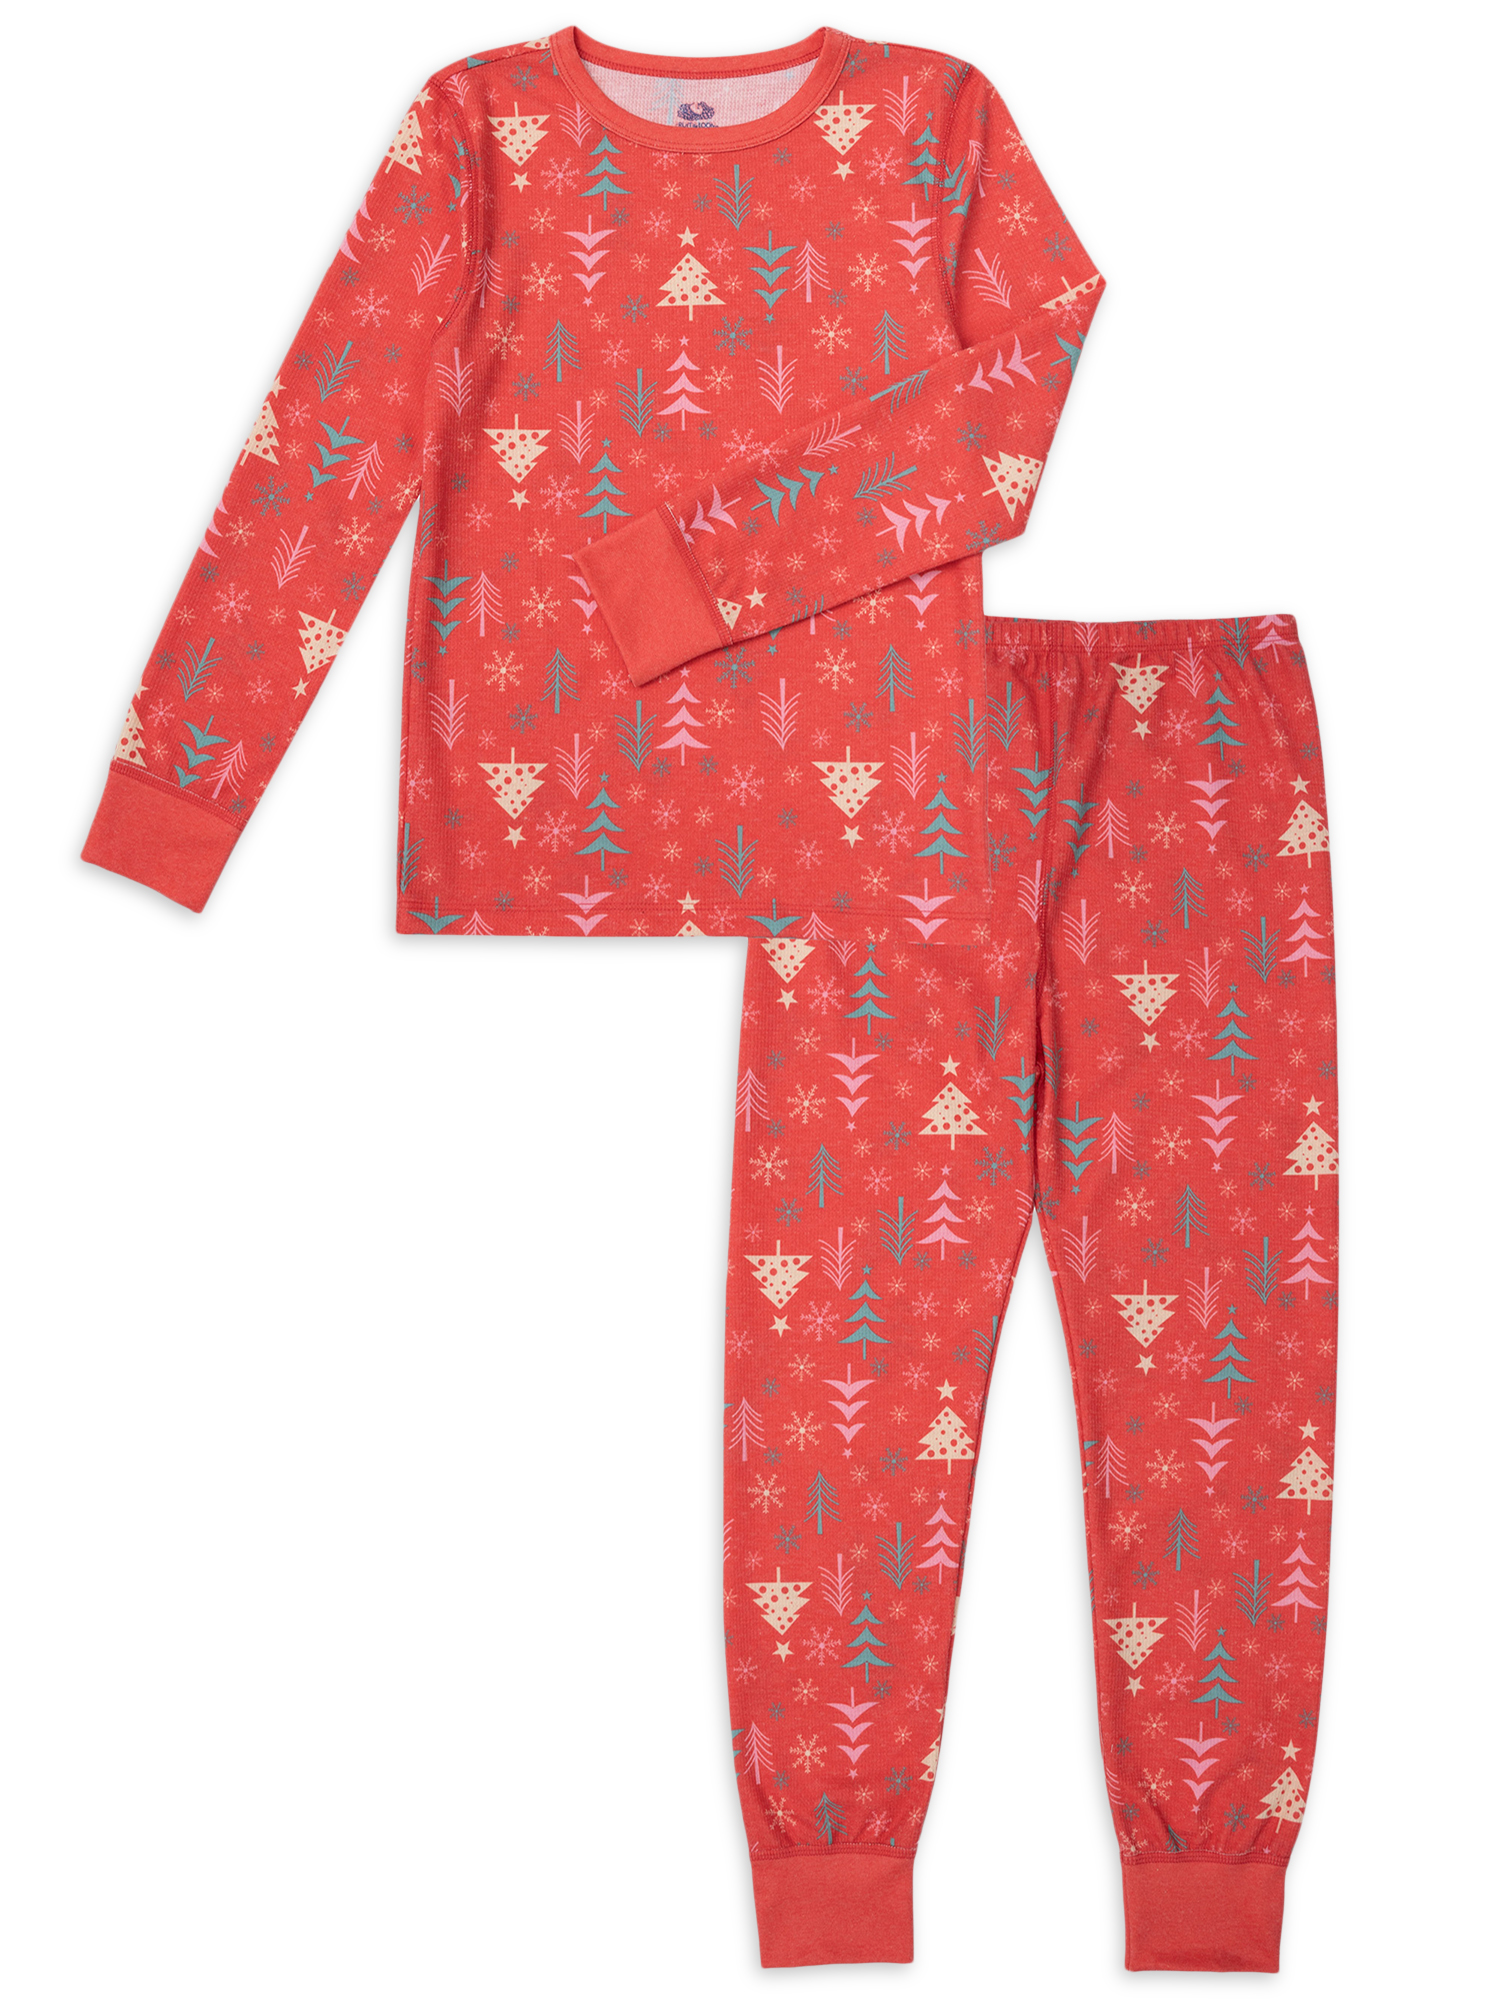 Fruit of the Loom Boy's & Girl's Holiday Thermal Top and Bottom Set, Sizes 4-18 - image 1 of 9